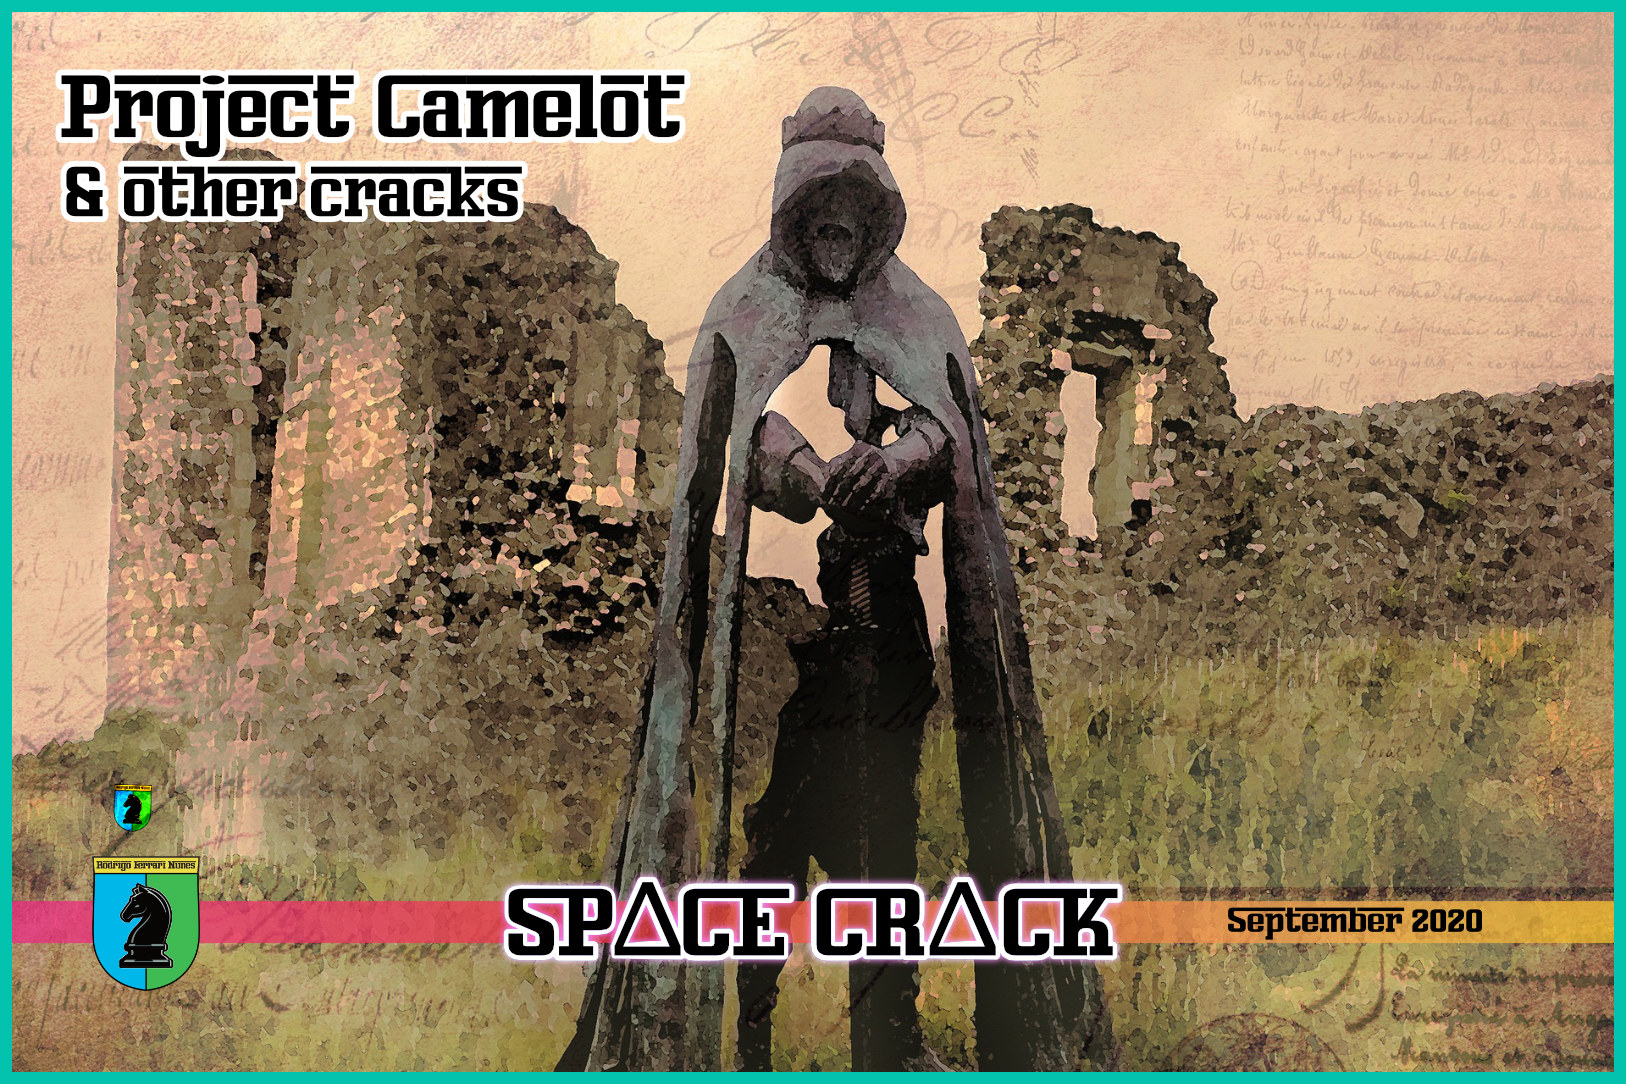 PROJECT CAMELOT AND OTHER CRACKS